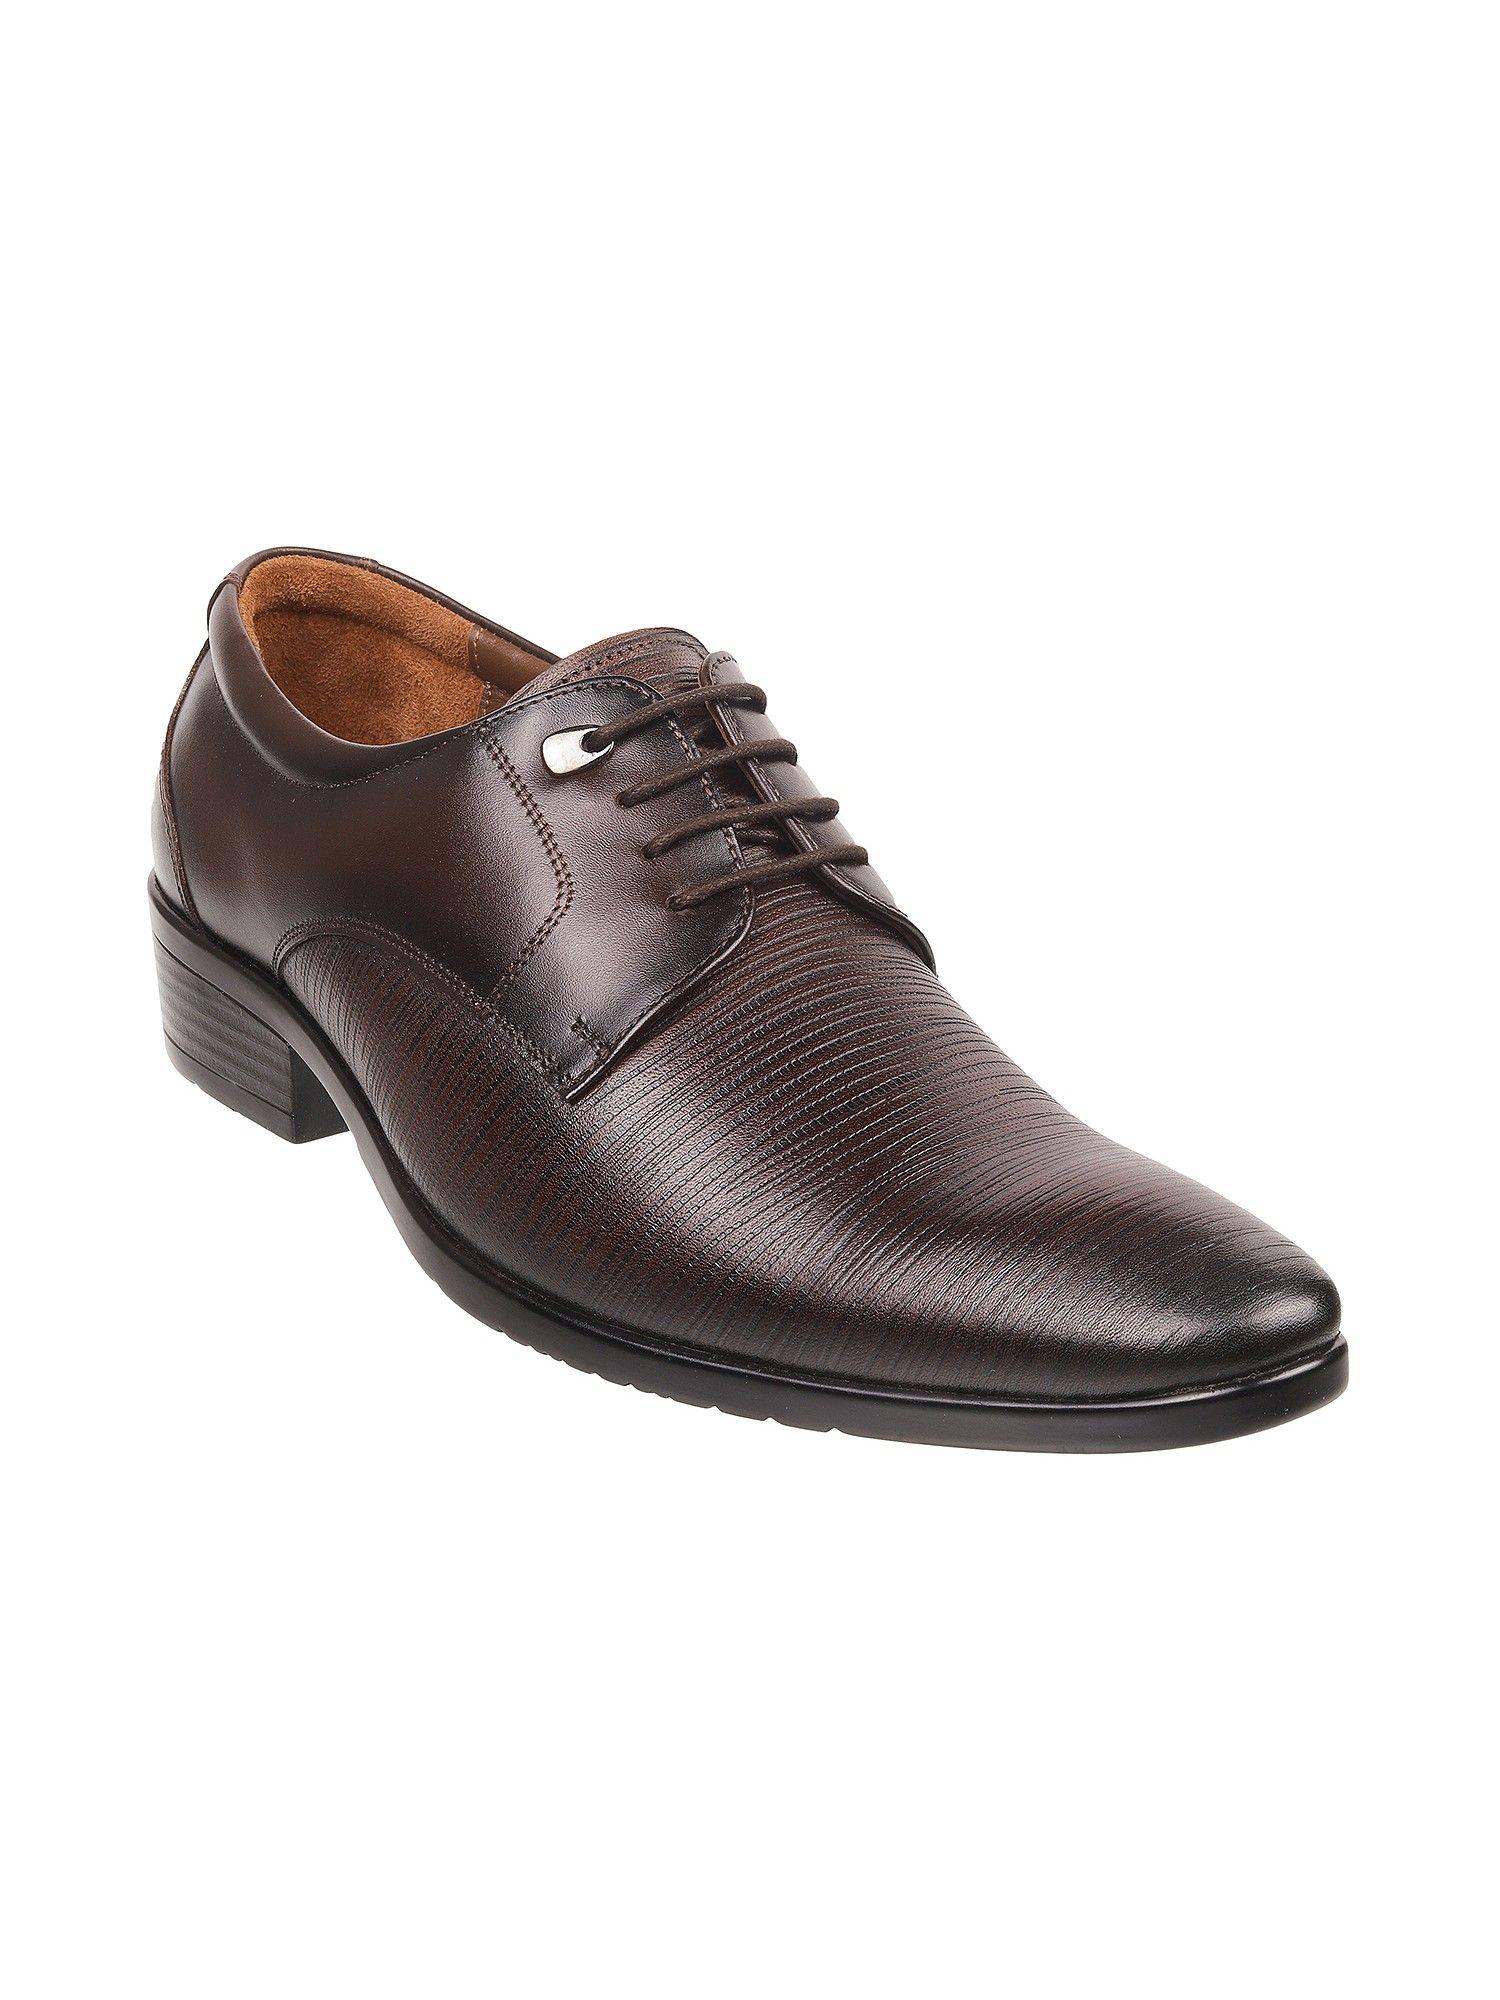 mens wine leather textured formal shoes